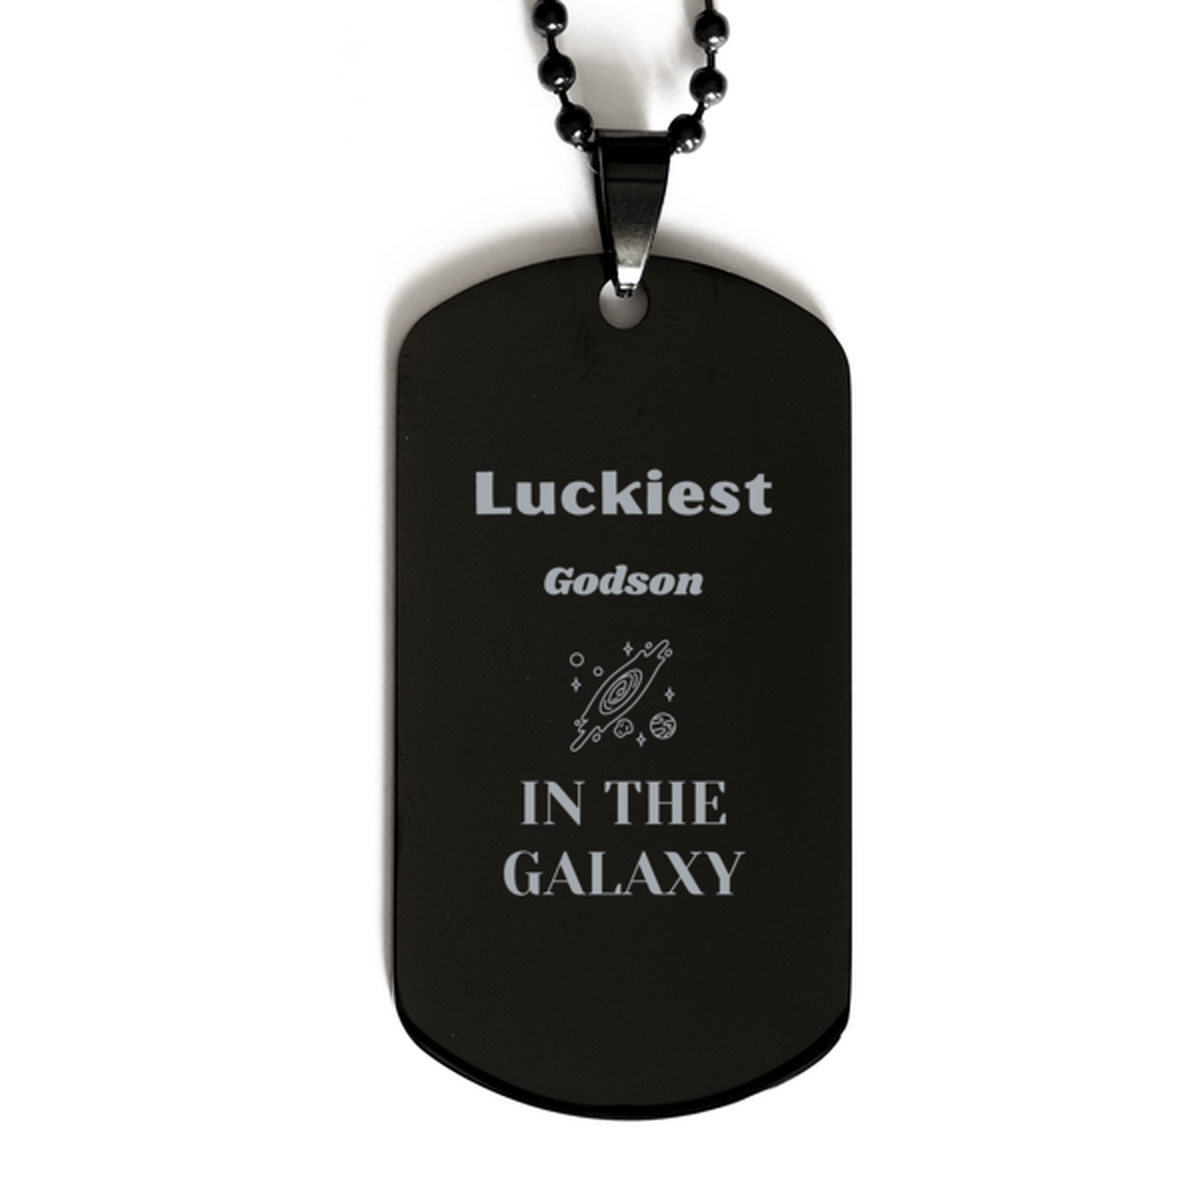 Luckiest Godson in the Galaxy, To My Godson Engraved Gifts, Christmas Godson Black Dog Tag Gifts, X-mas Birthday Unique Gifts For Godson Men Women